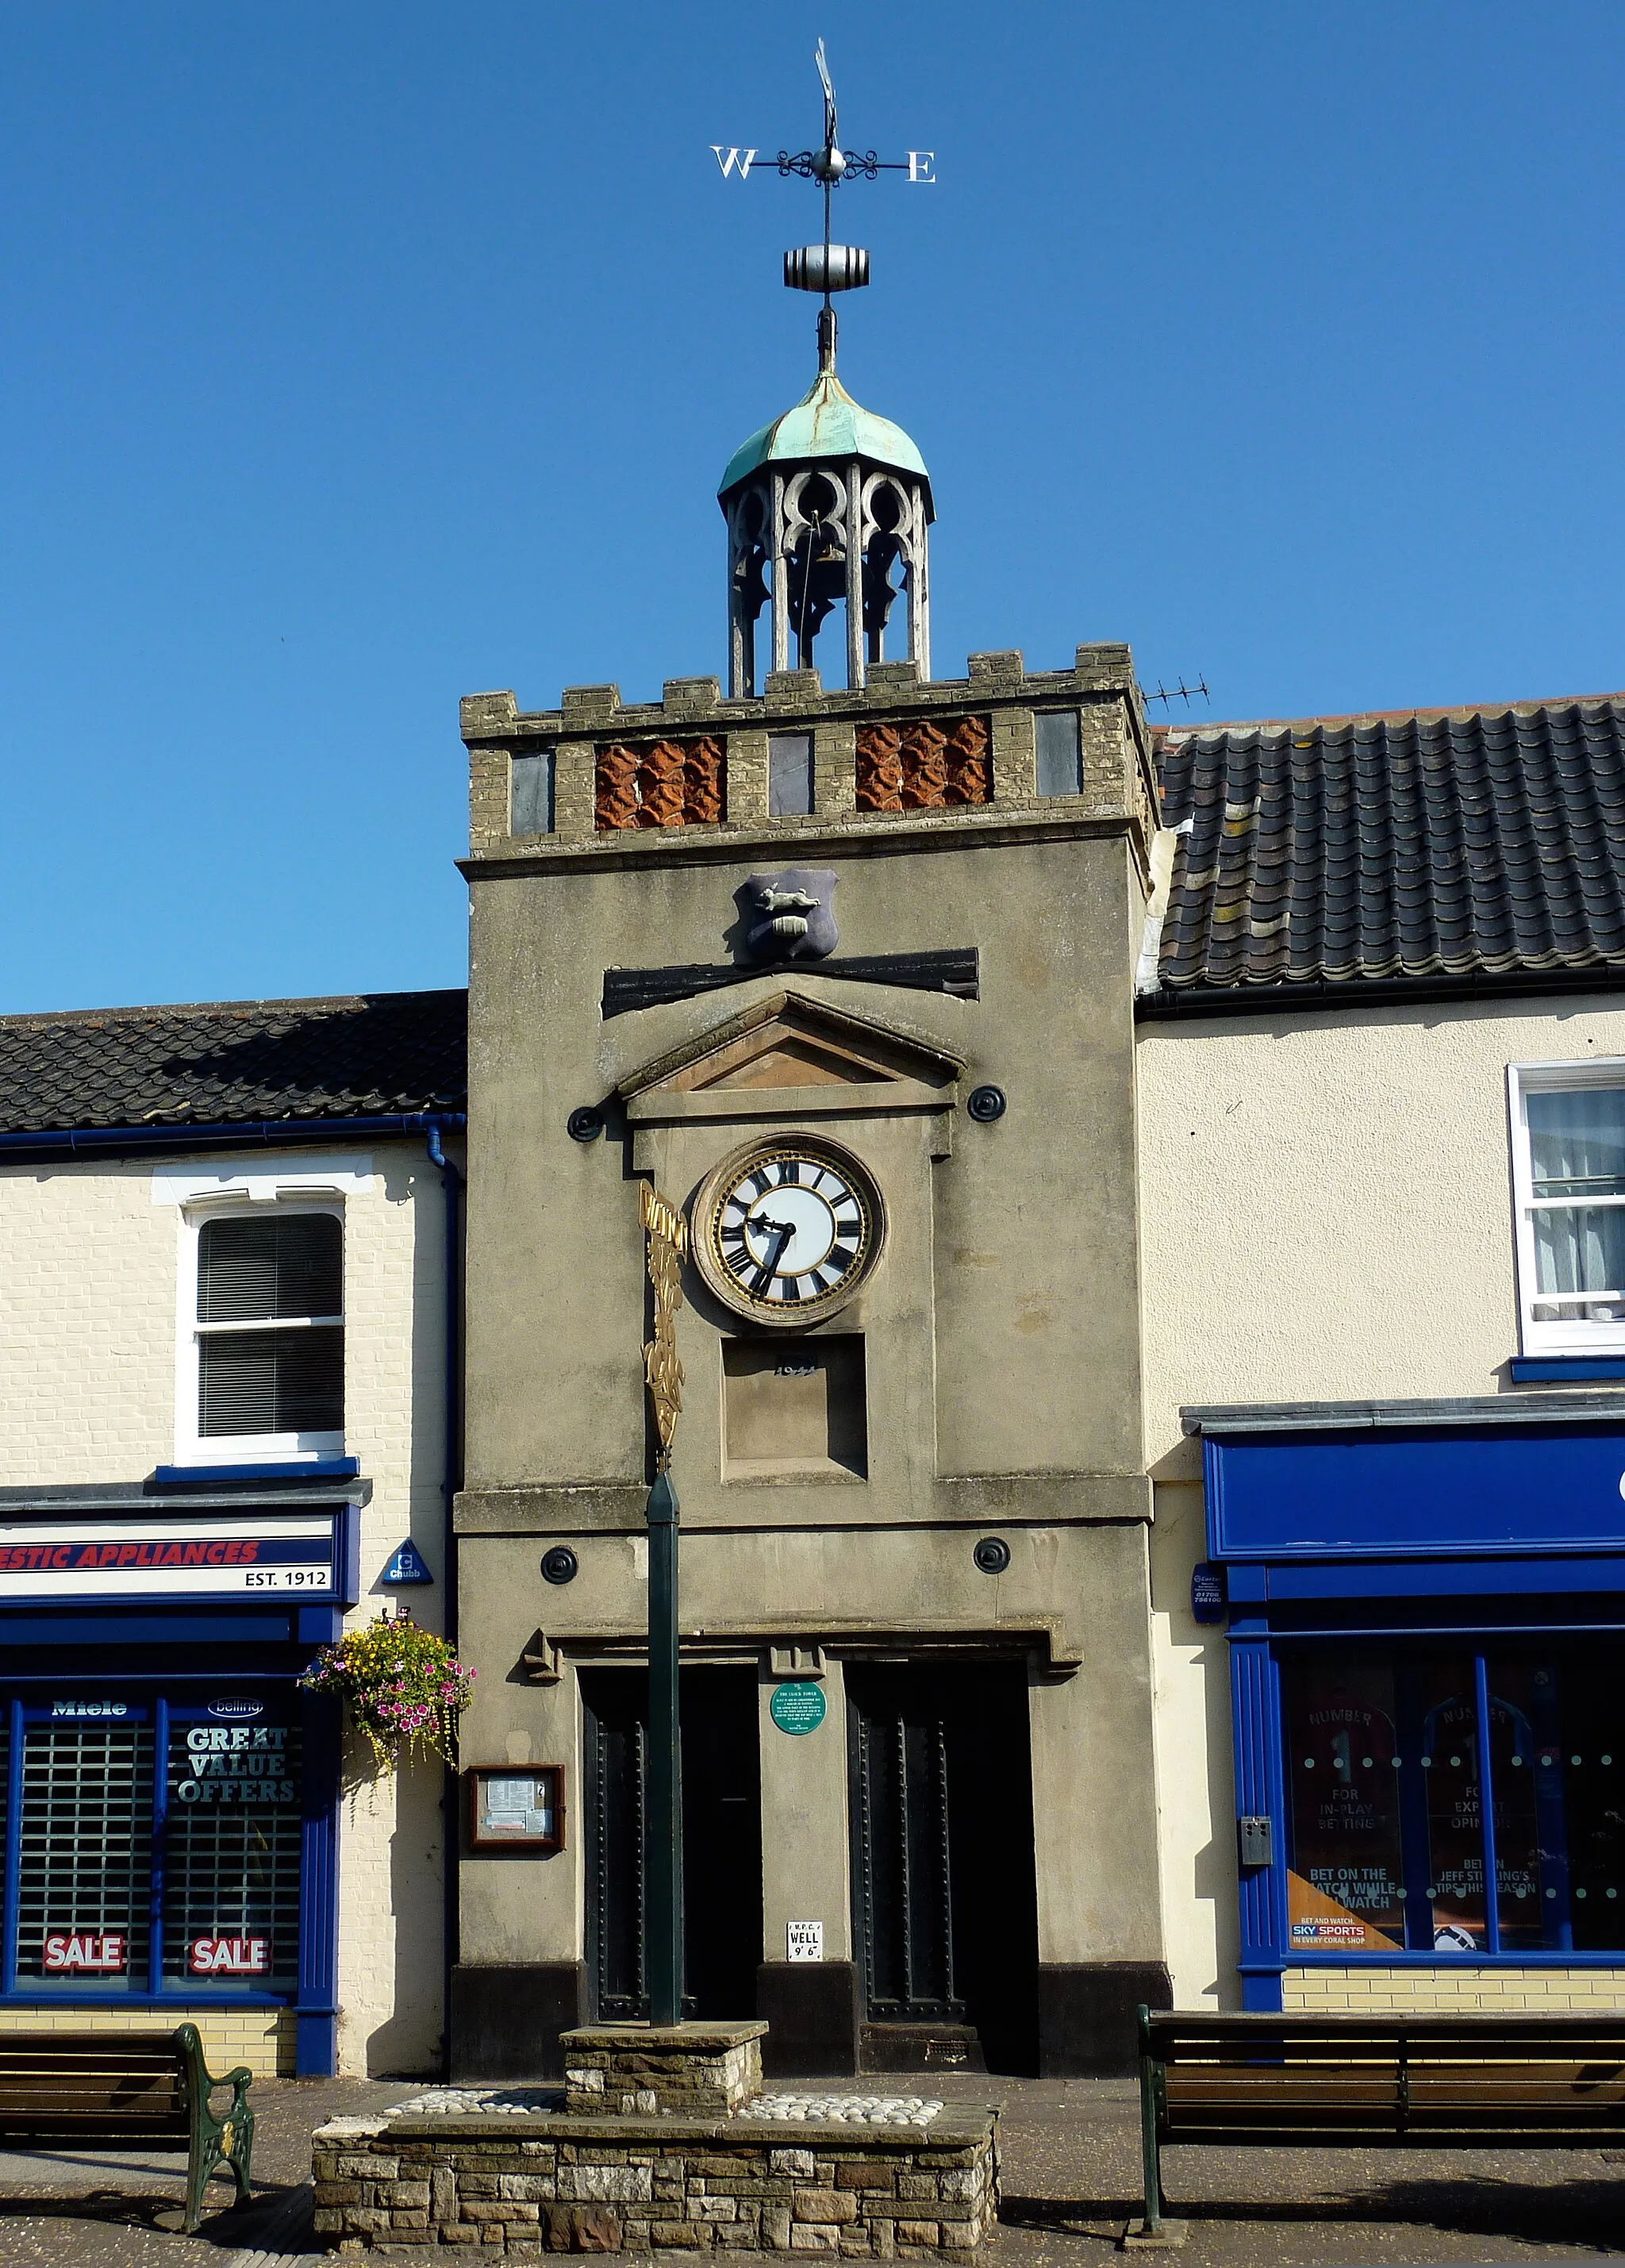 Photo showing: The old Clock Tower in Watton, Norfolk, England. The tower was built in 1679 to hold a fire warning bell following the 'Great Fire of Watton' that destroyed more than sixty properties in 1674. This early warning bell, known as 'Ting-Tang' sits in an ornate cupola on top of the tower.